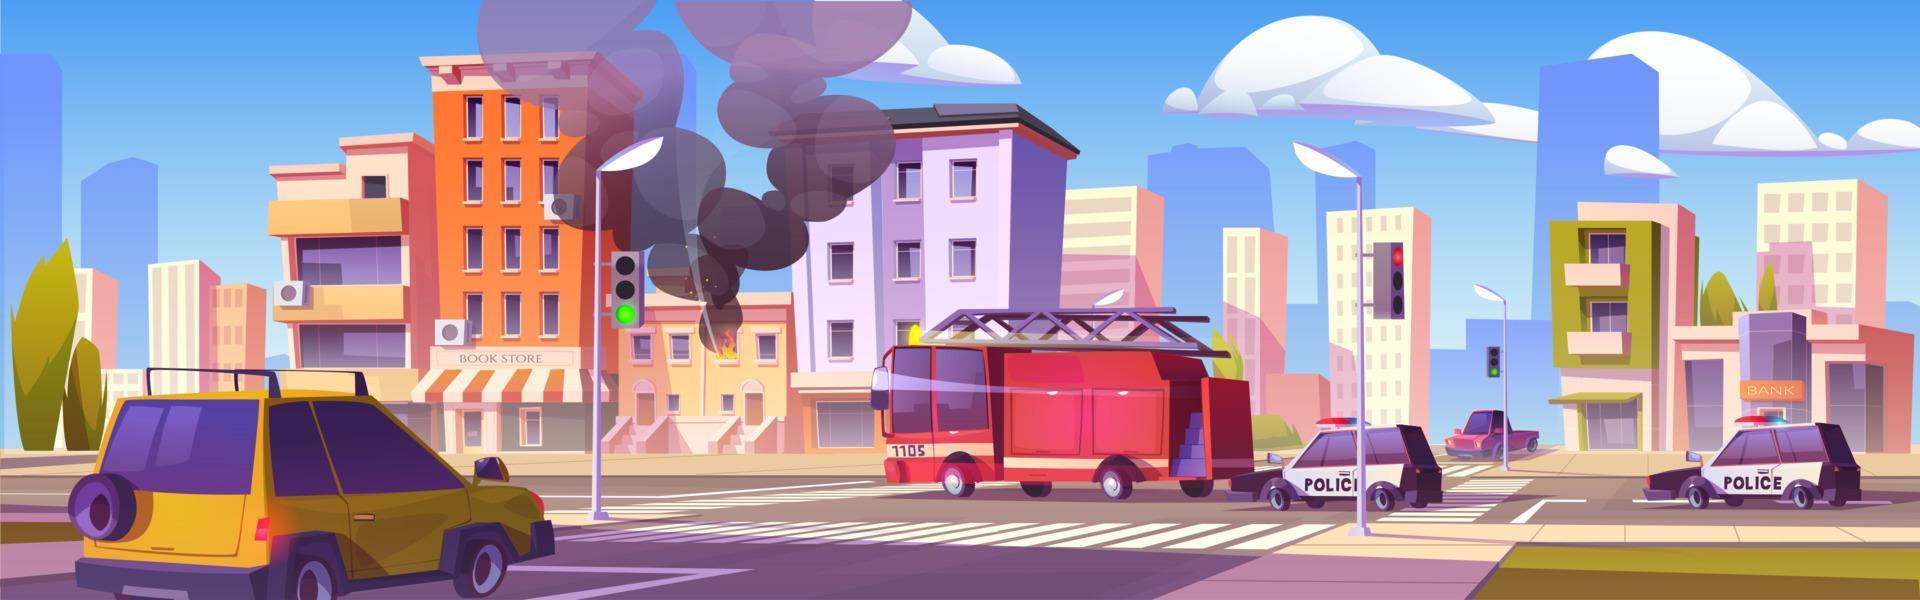 Burning city building and firefighter truck vector